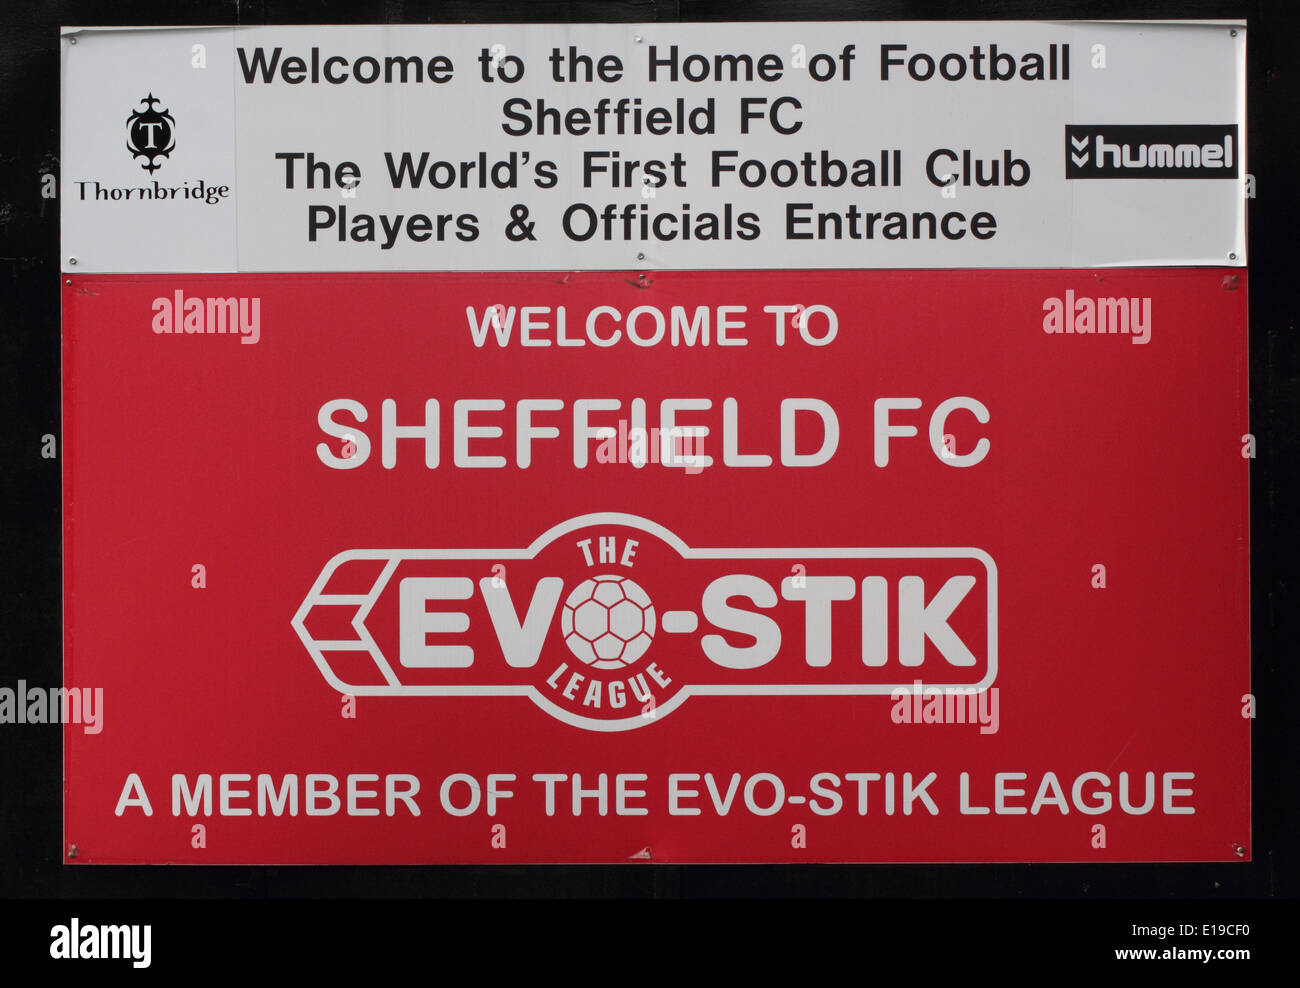 Players and officials entrance welcome board at Sheffield Football Club; the world's first football club, Dronfield, England UK. Stock Photo